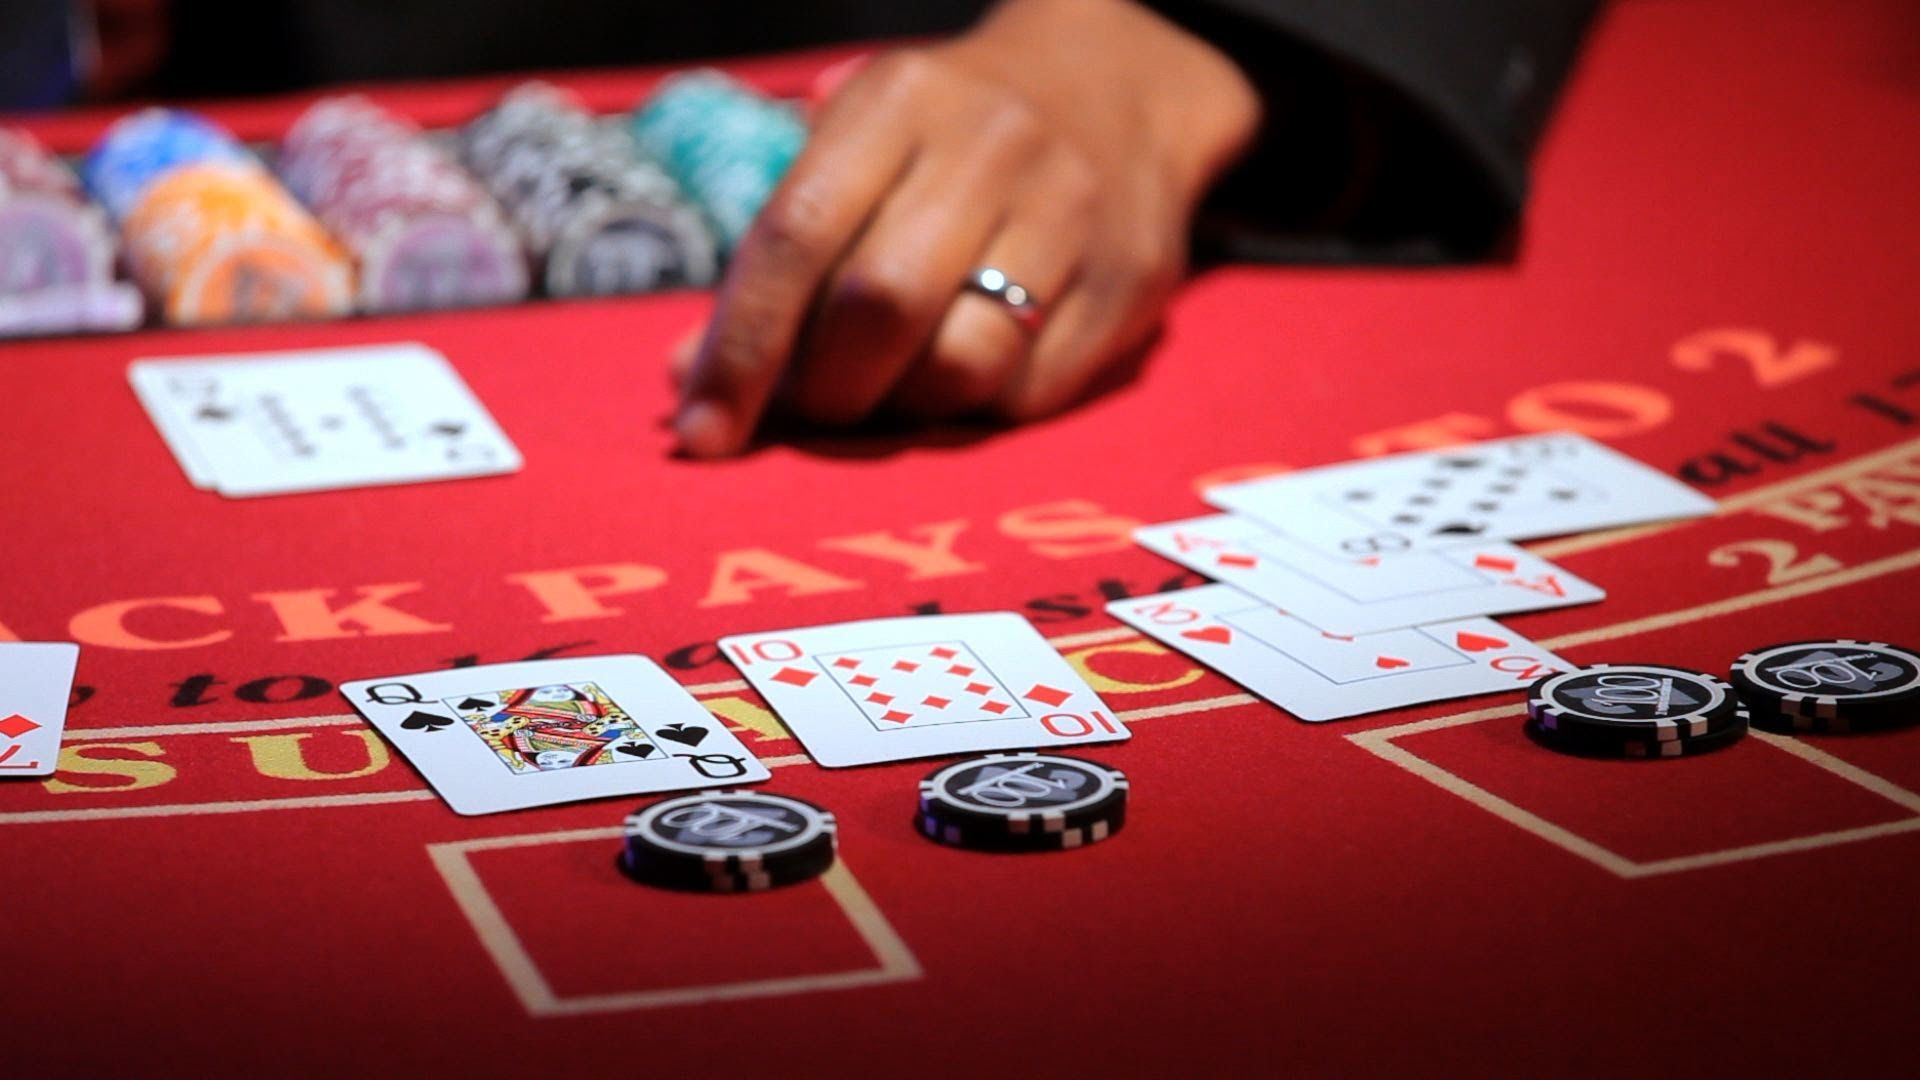 What factors make a site best for online gambling? Complete information